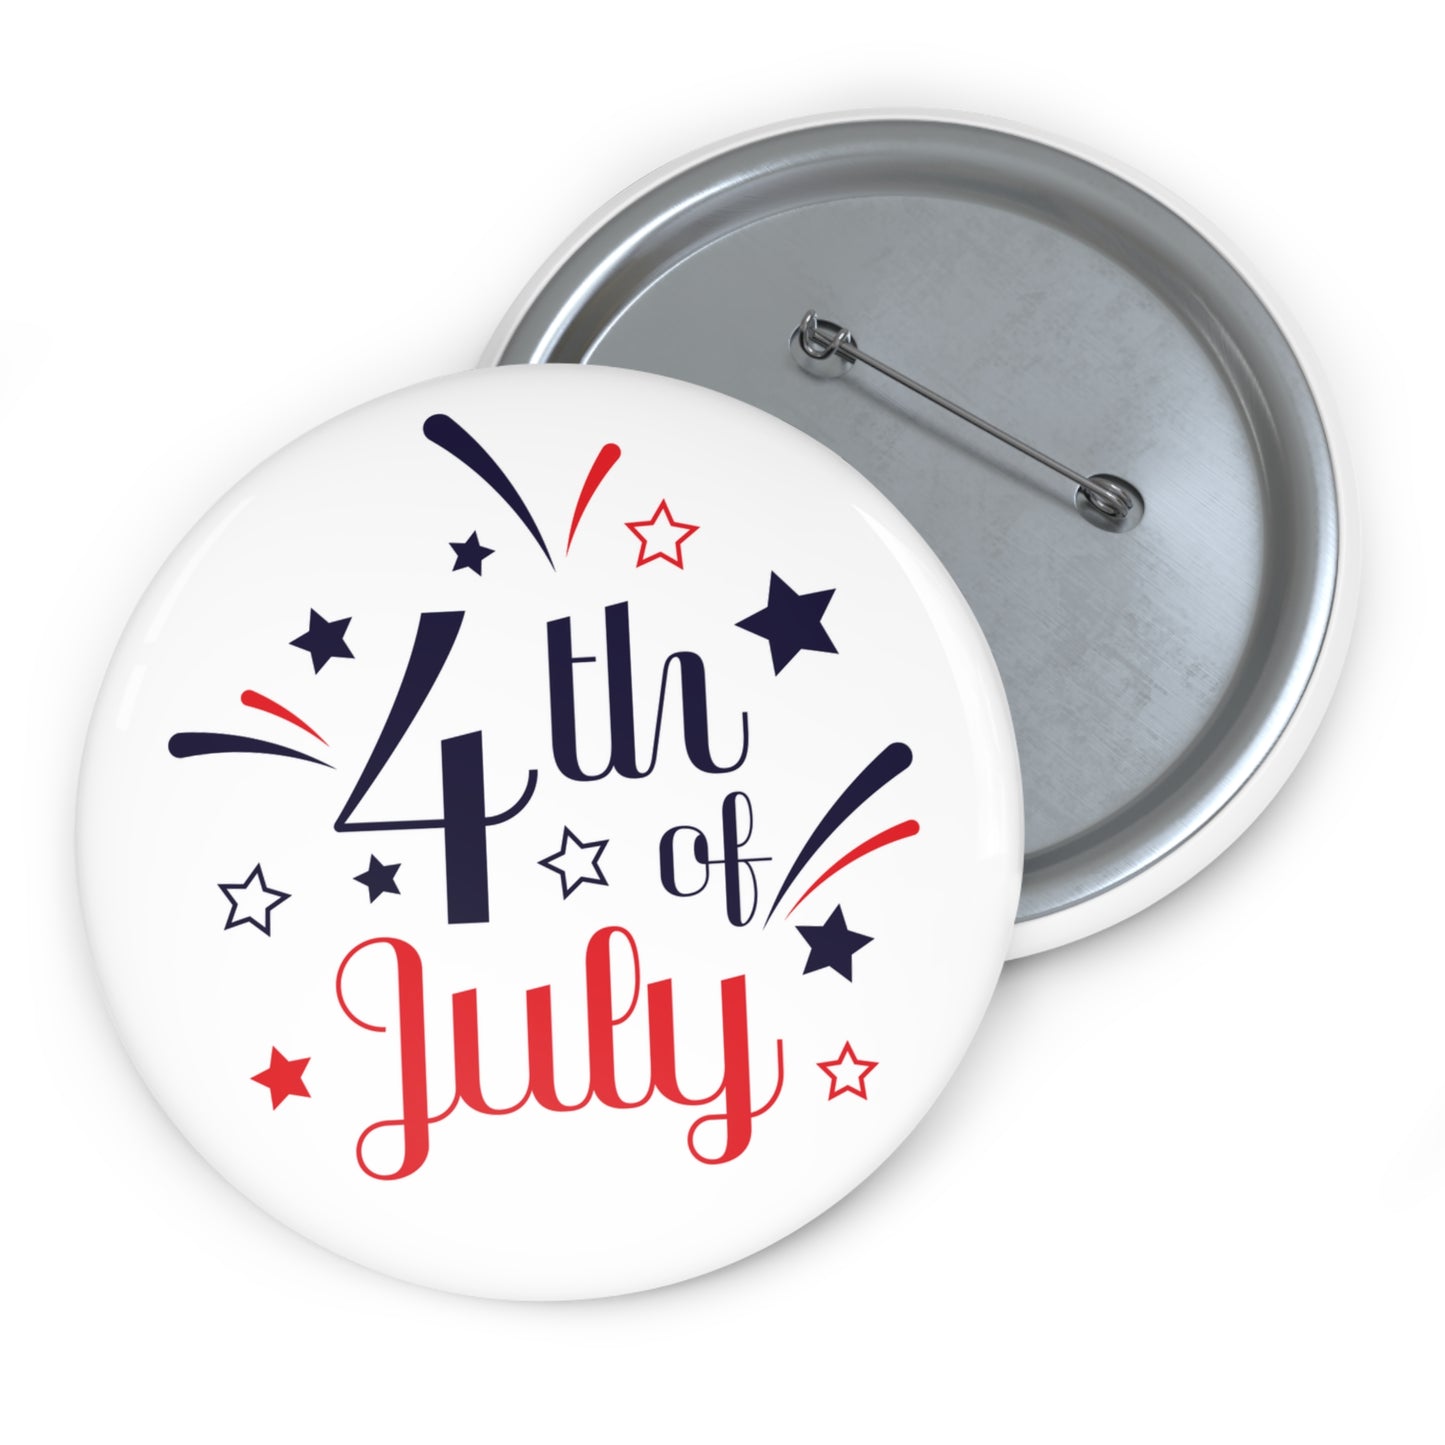 A colorful pin-back button with the text "4th of July" in red and blue, surrounded by star and fireworks graphics. The 4th of July Buttons: 2 sizes; Lightweight metal; Graphics from Printify is partially open, revealing its safety pin backing.